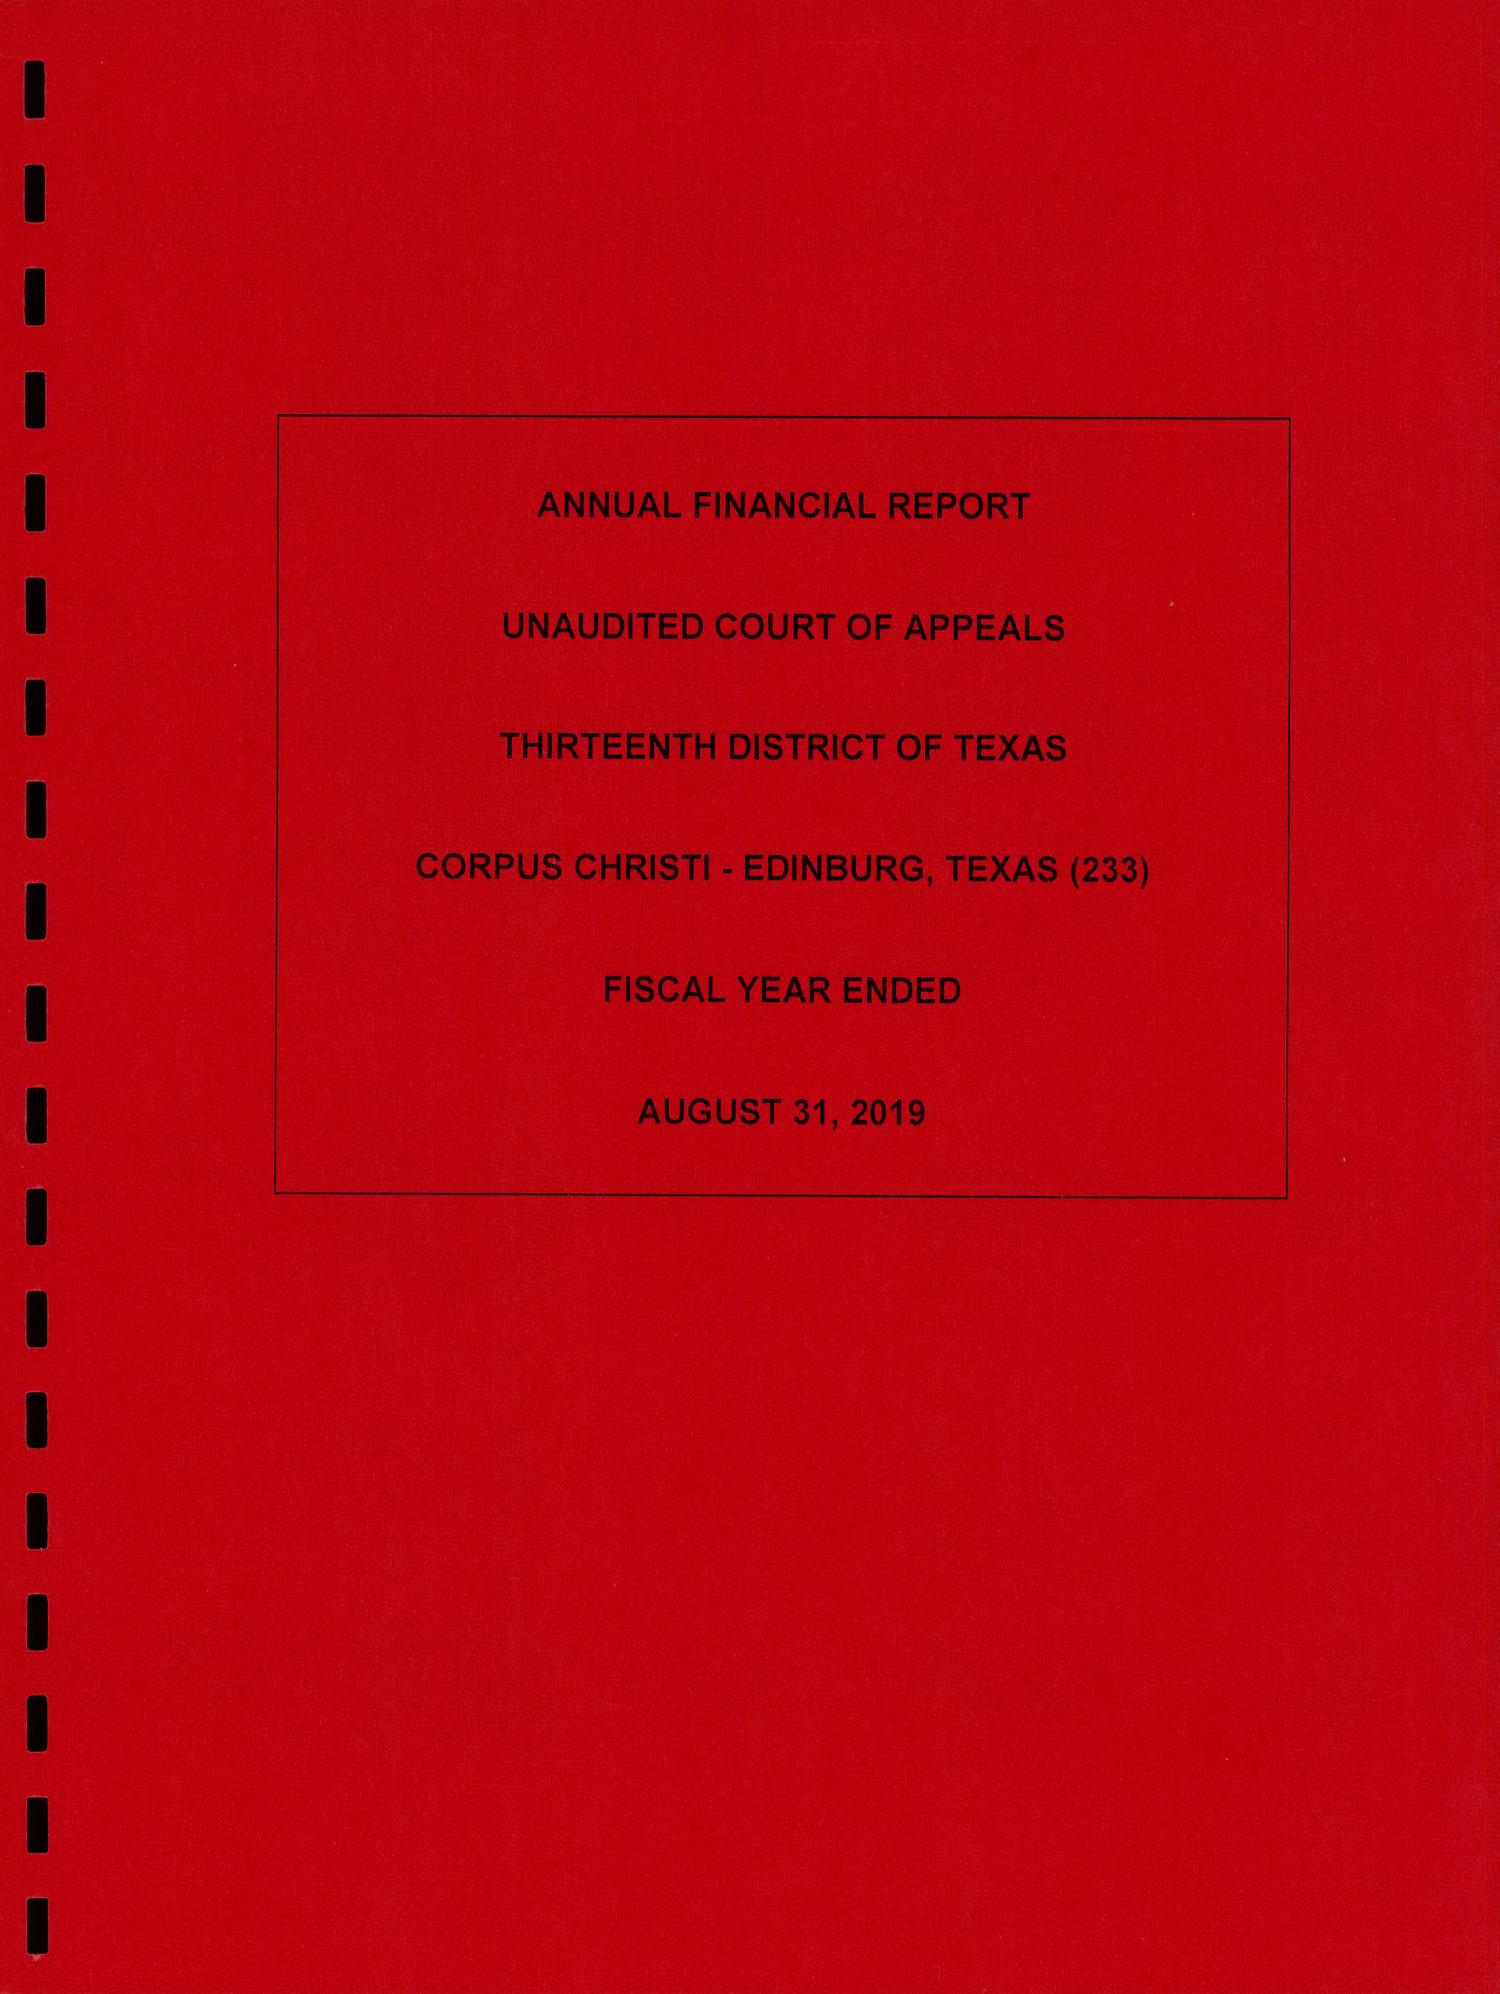 Texas Thirteenth Court of Appeals Annual Financial Report: 2019 The